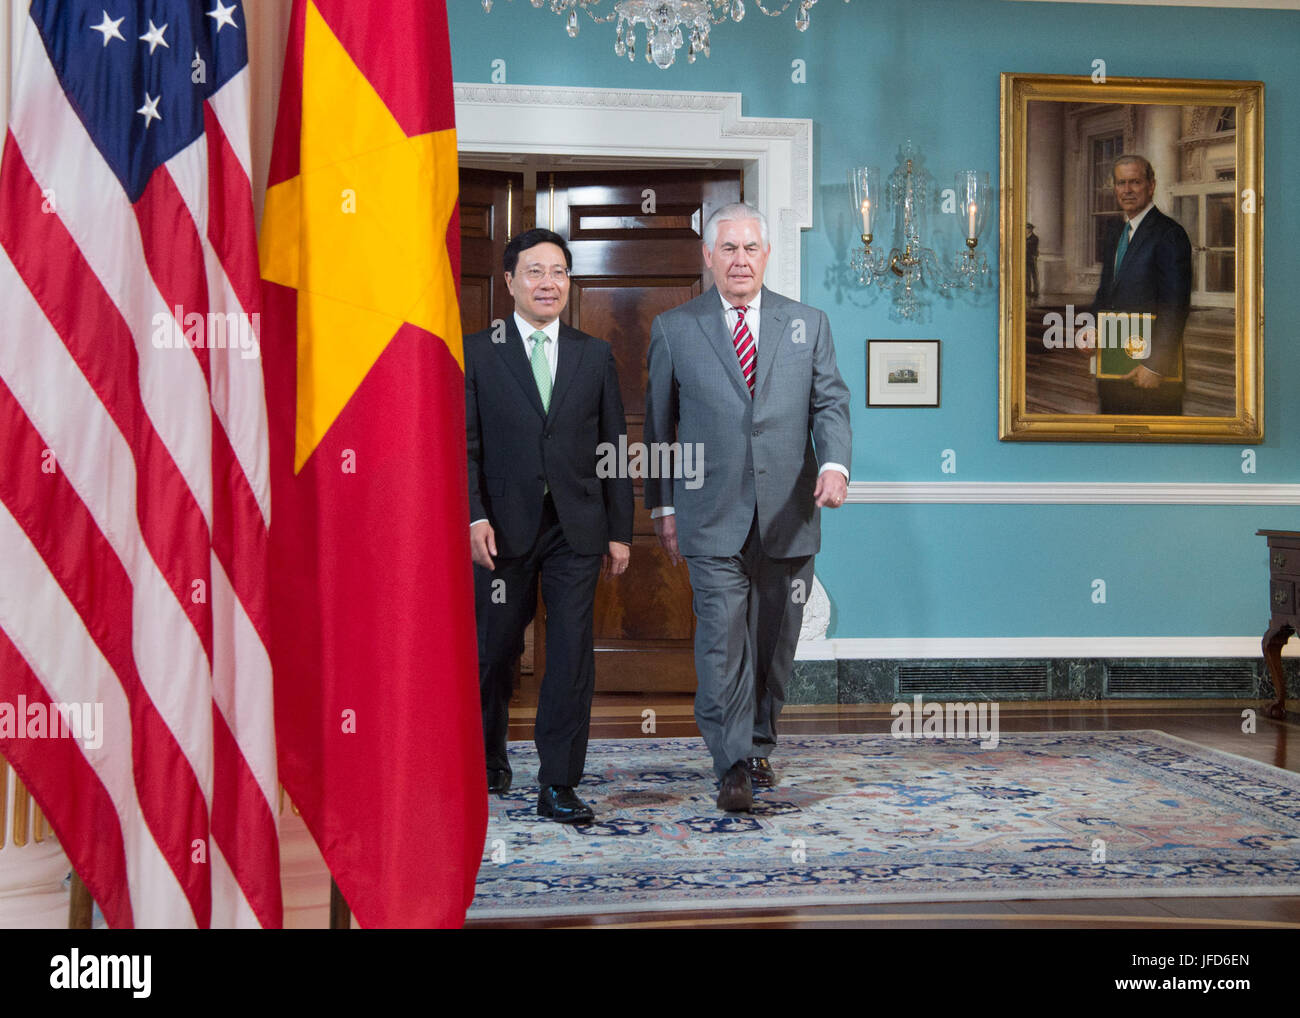 U.S. Secretary of State Rex Tillerson and  Vietnamese Deputy Prime Minister and Foreign Minister Pham Binh Minh enter the Treaty Room for a camera spray before their bilateral meeting at the U.S. Department of State in Washington, D.C., on April 20, 2017. Stock Photo